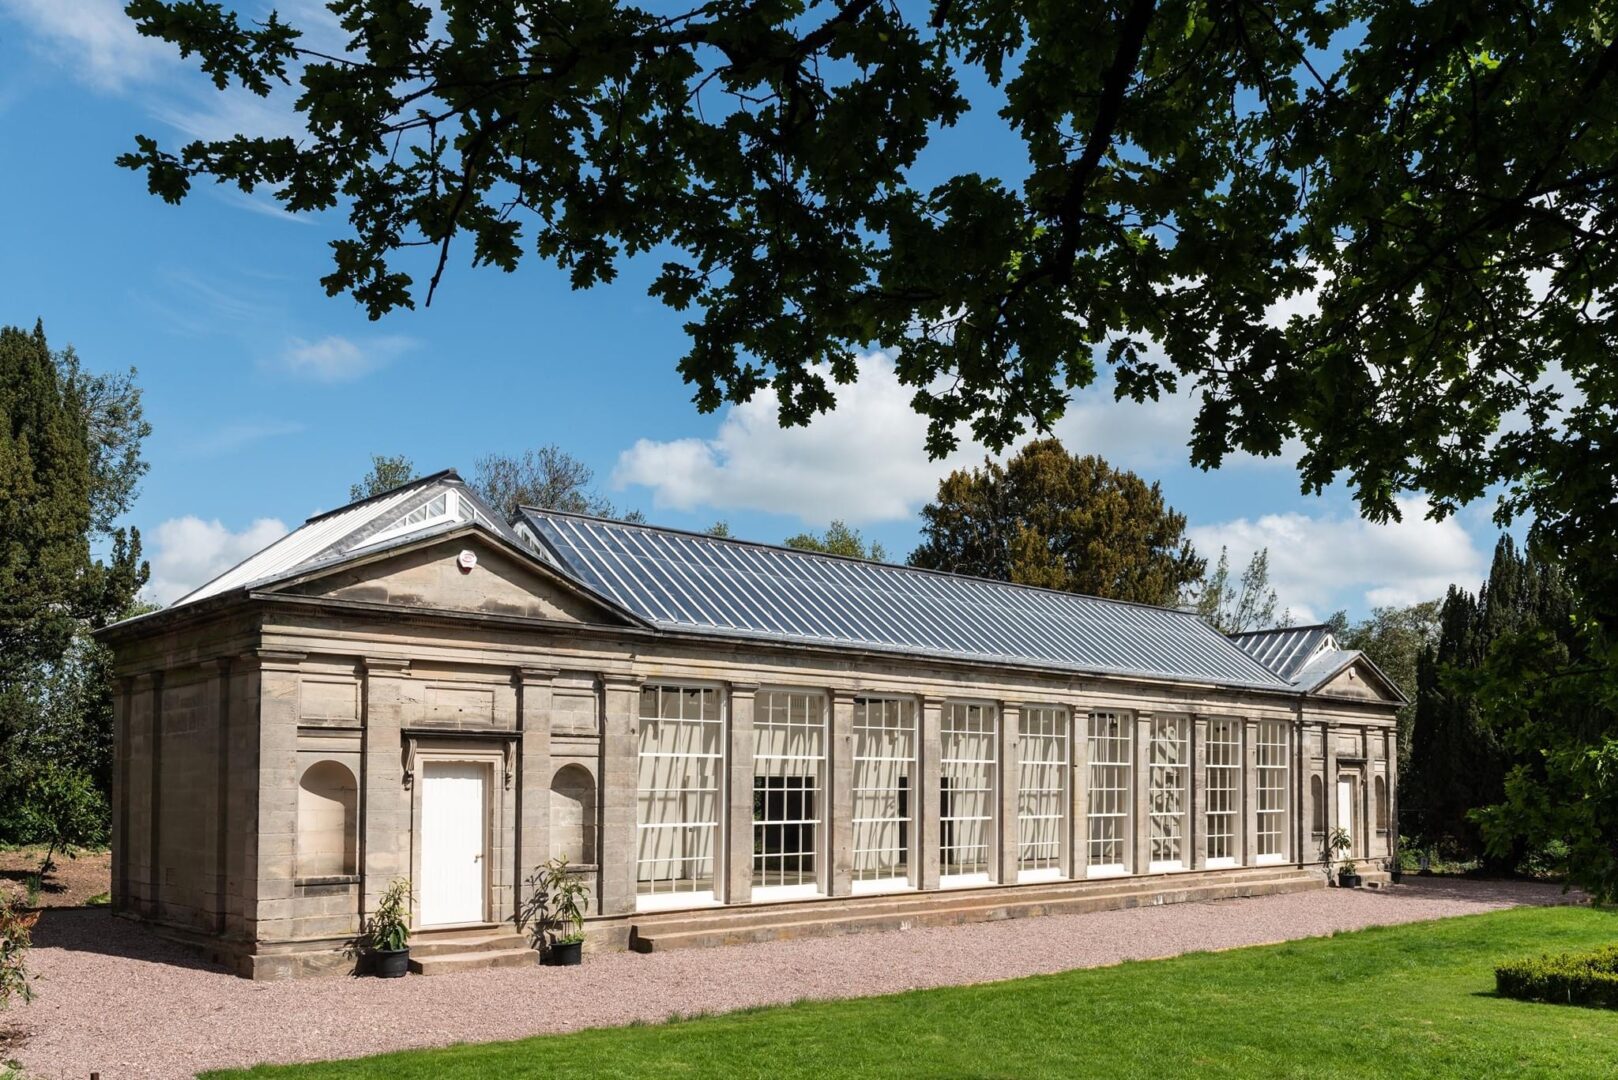 Ingestre Orangery from the outside